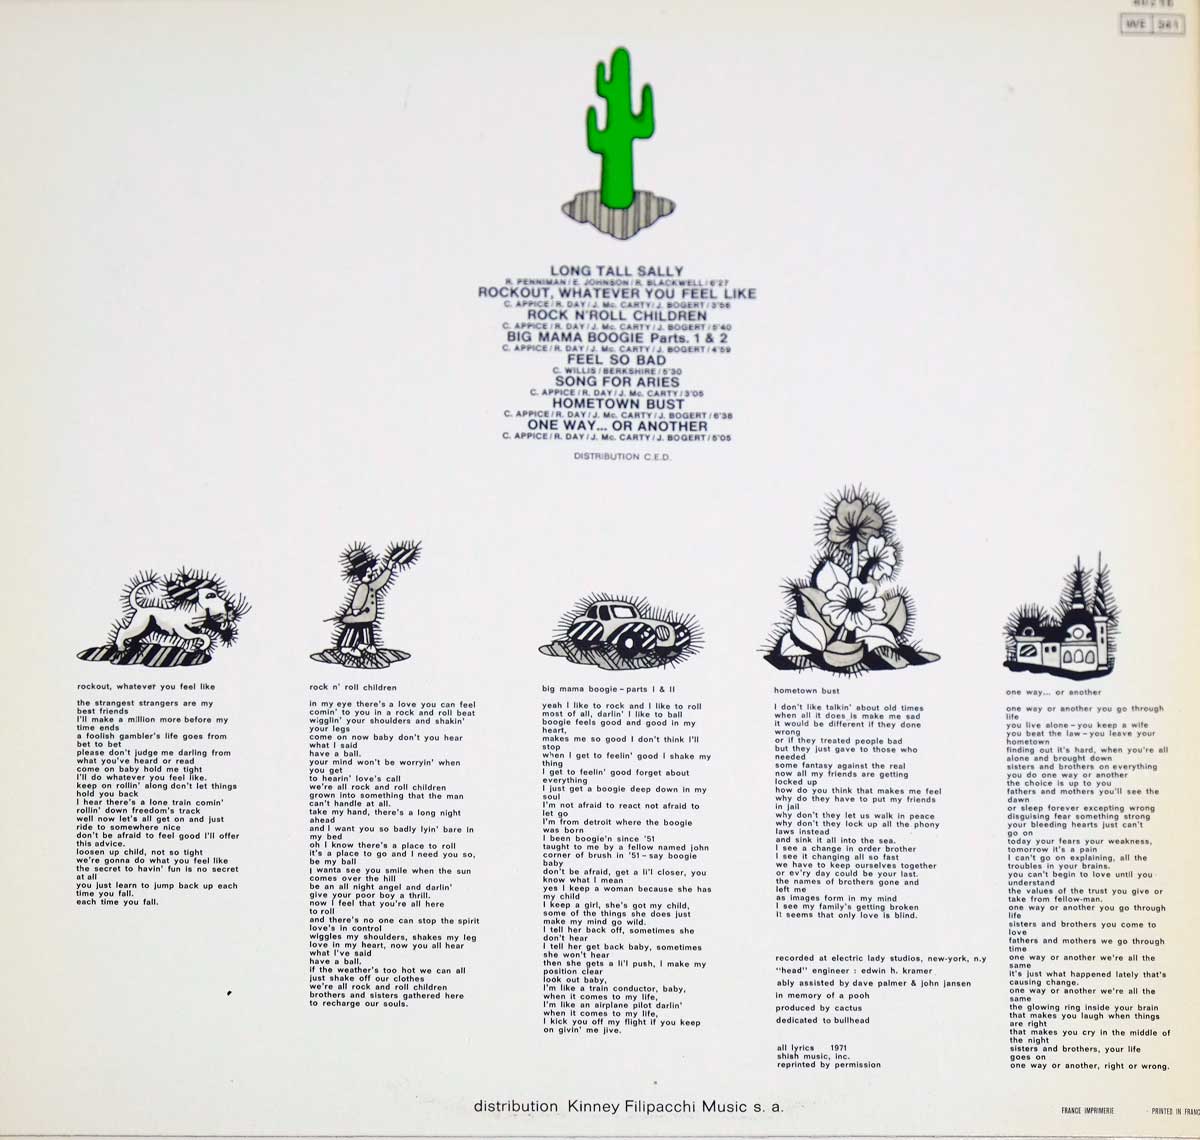 Photo of Cactus One Way Or Another Album back cover